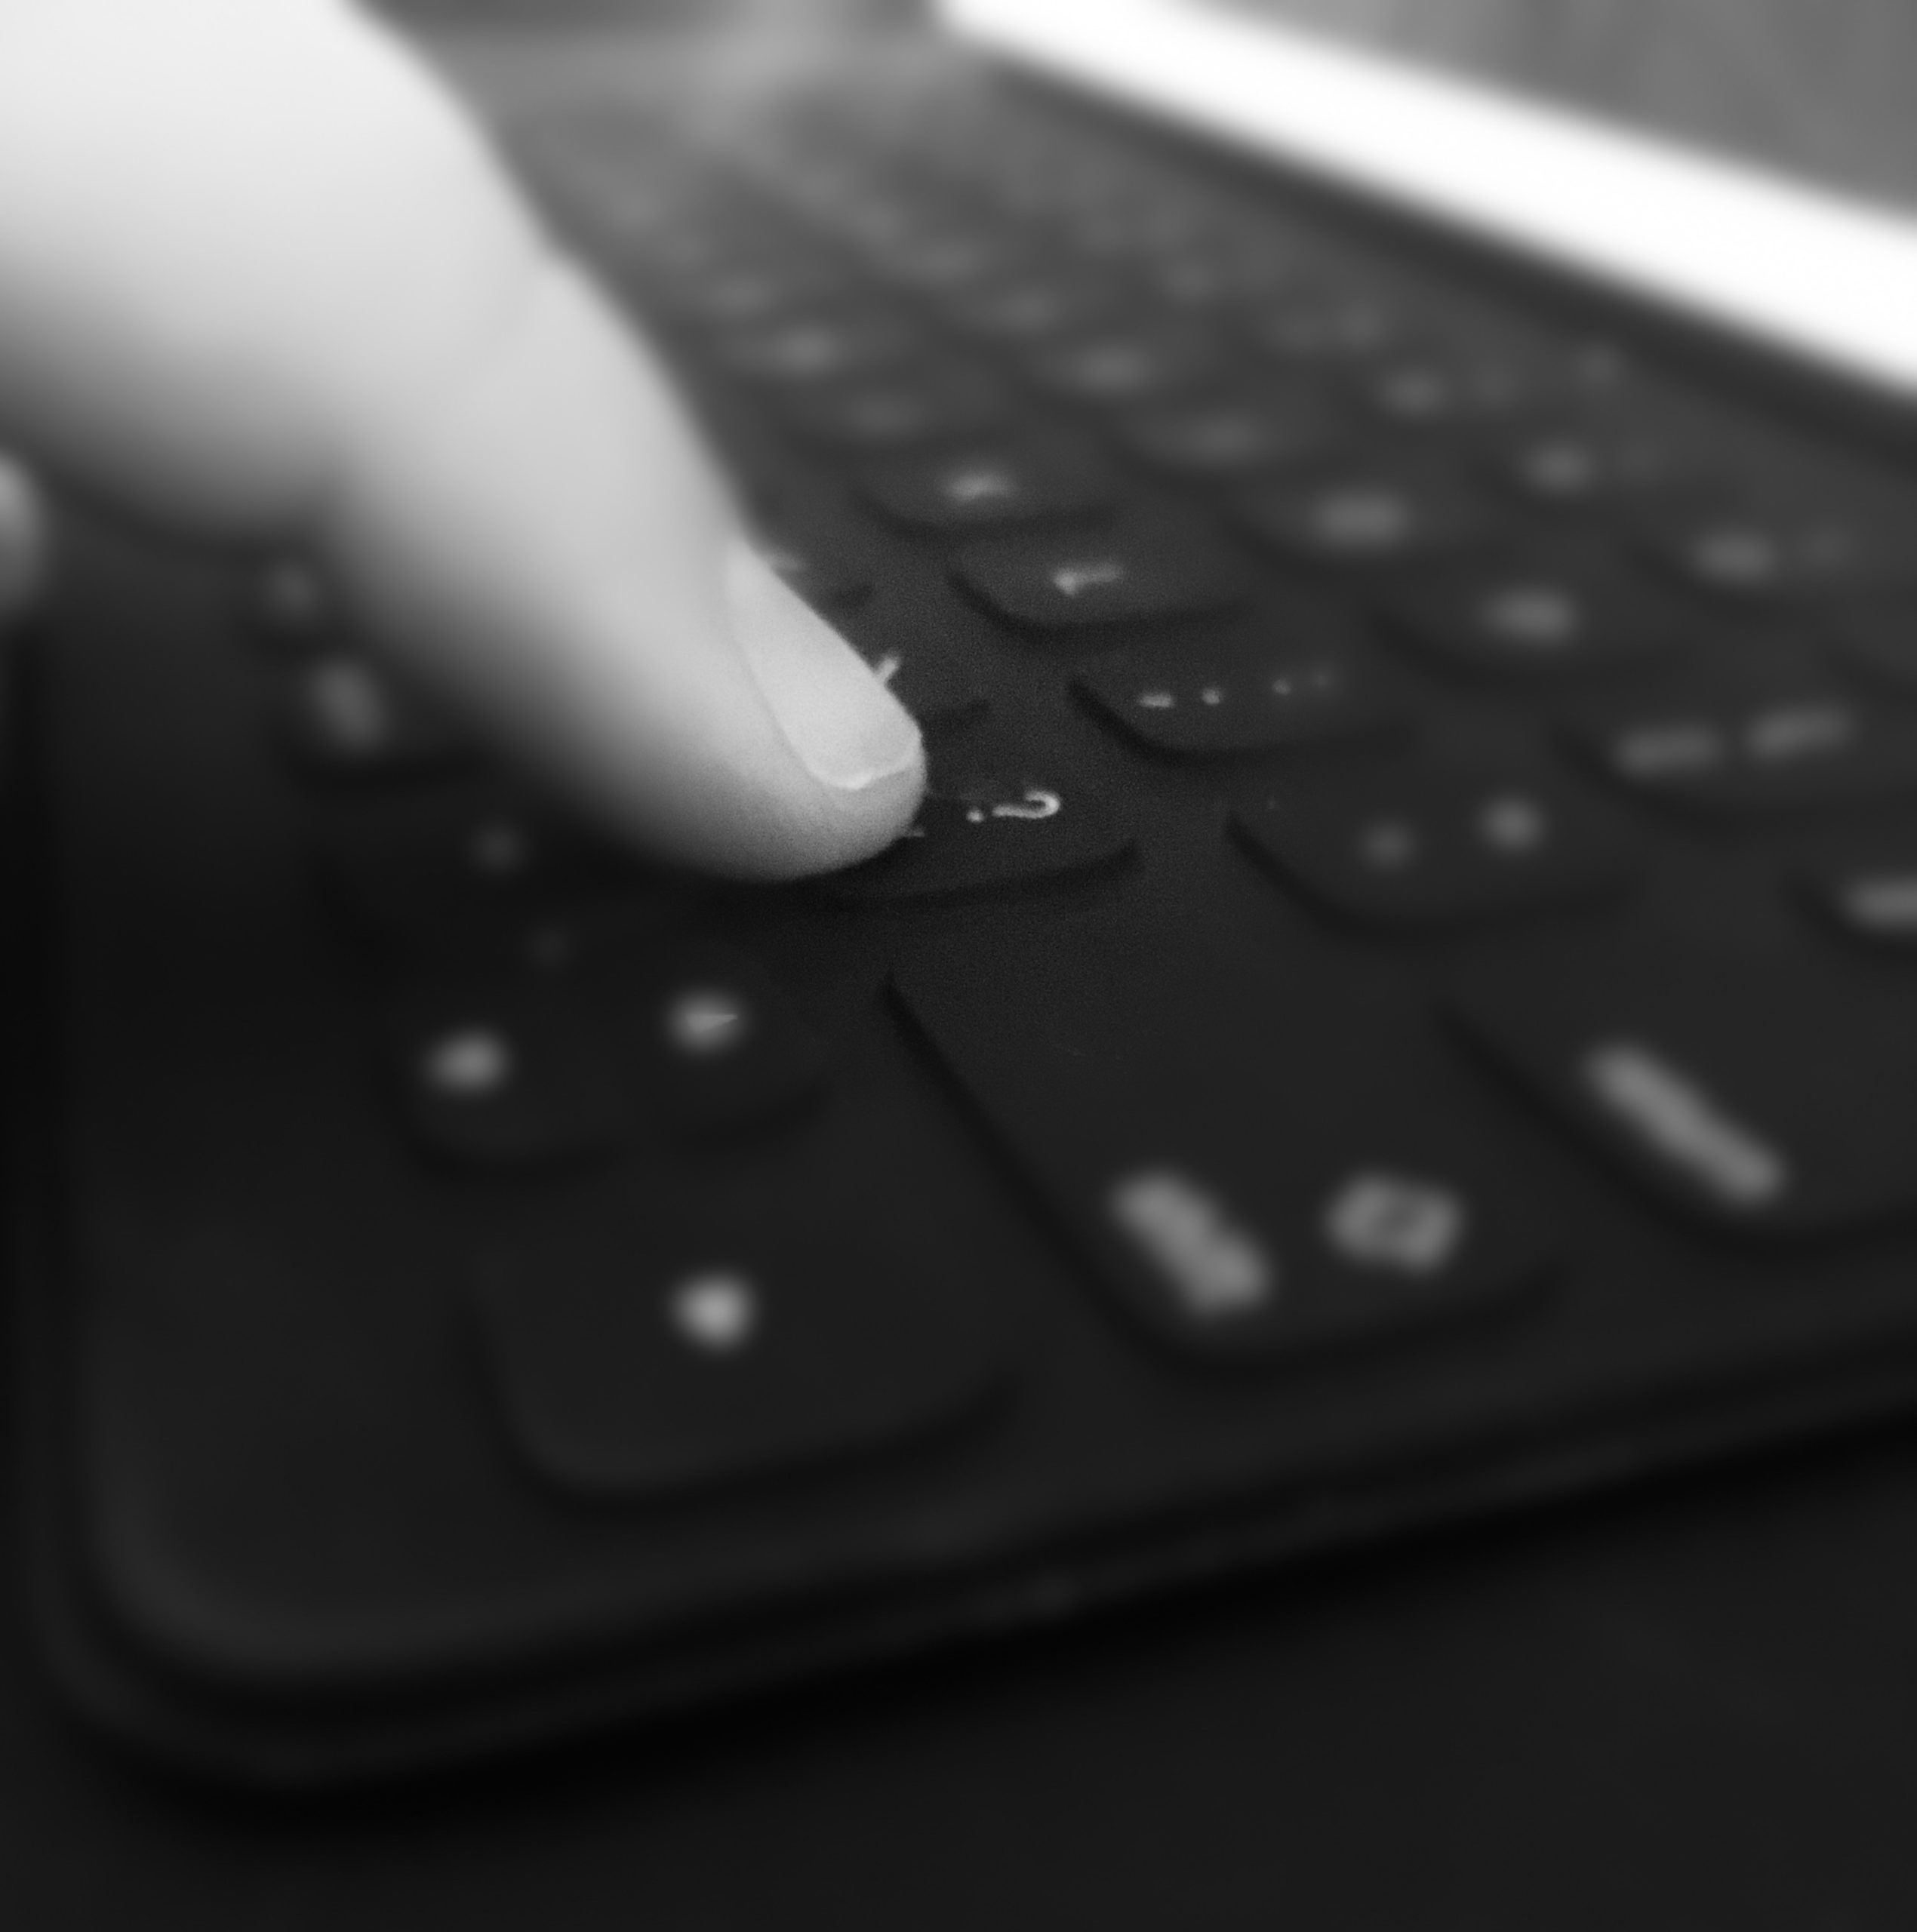 A pointer finger touches the question mark key on a keyboard. Black and white filter shades photo.